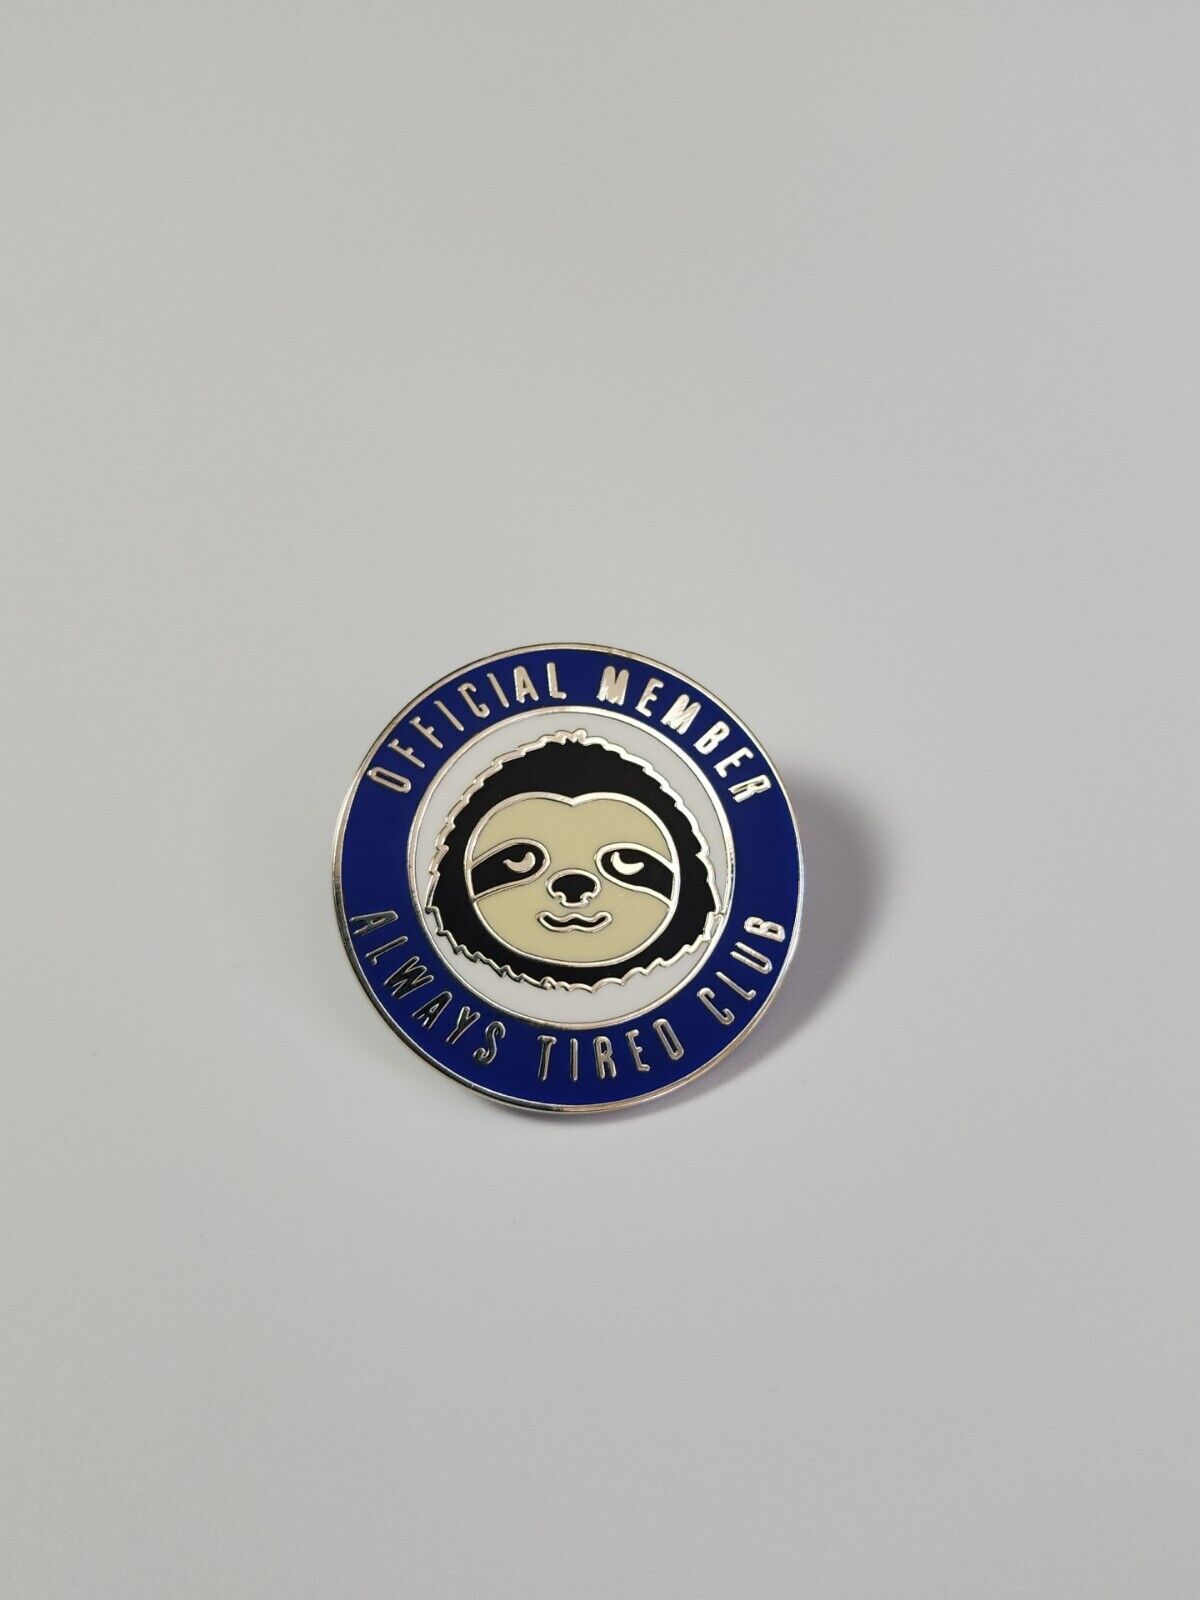 Official Member Of The Always Tired Club Lapel Pin Sloth Animal Humorous 